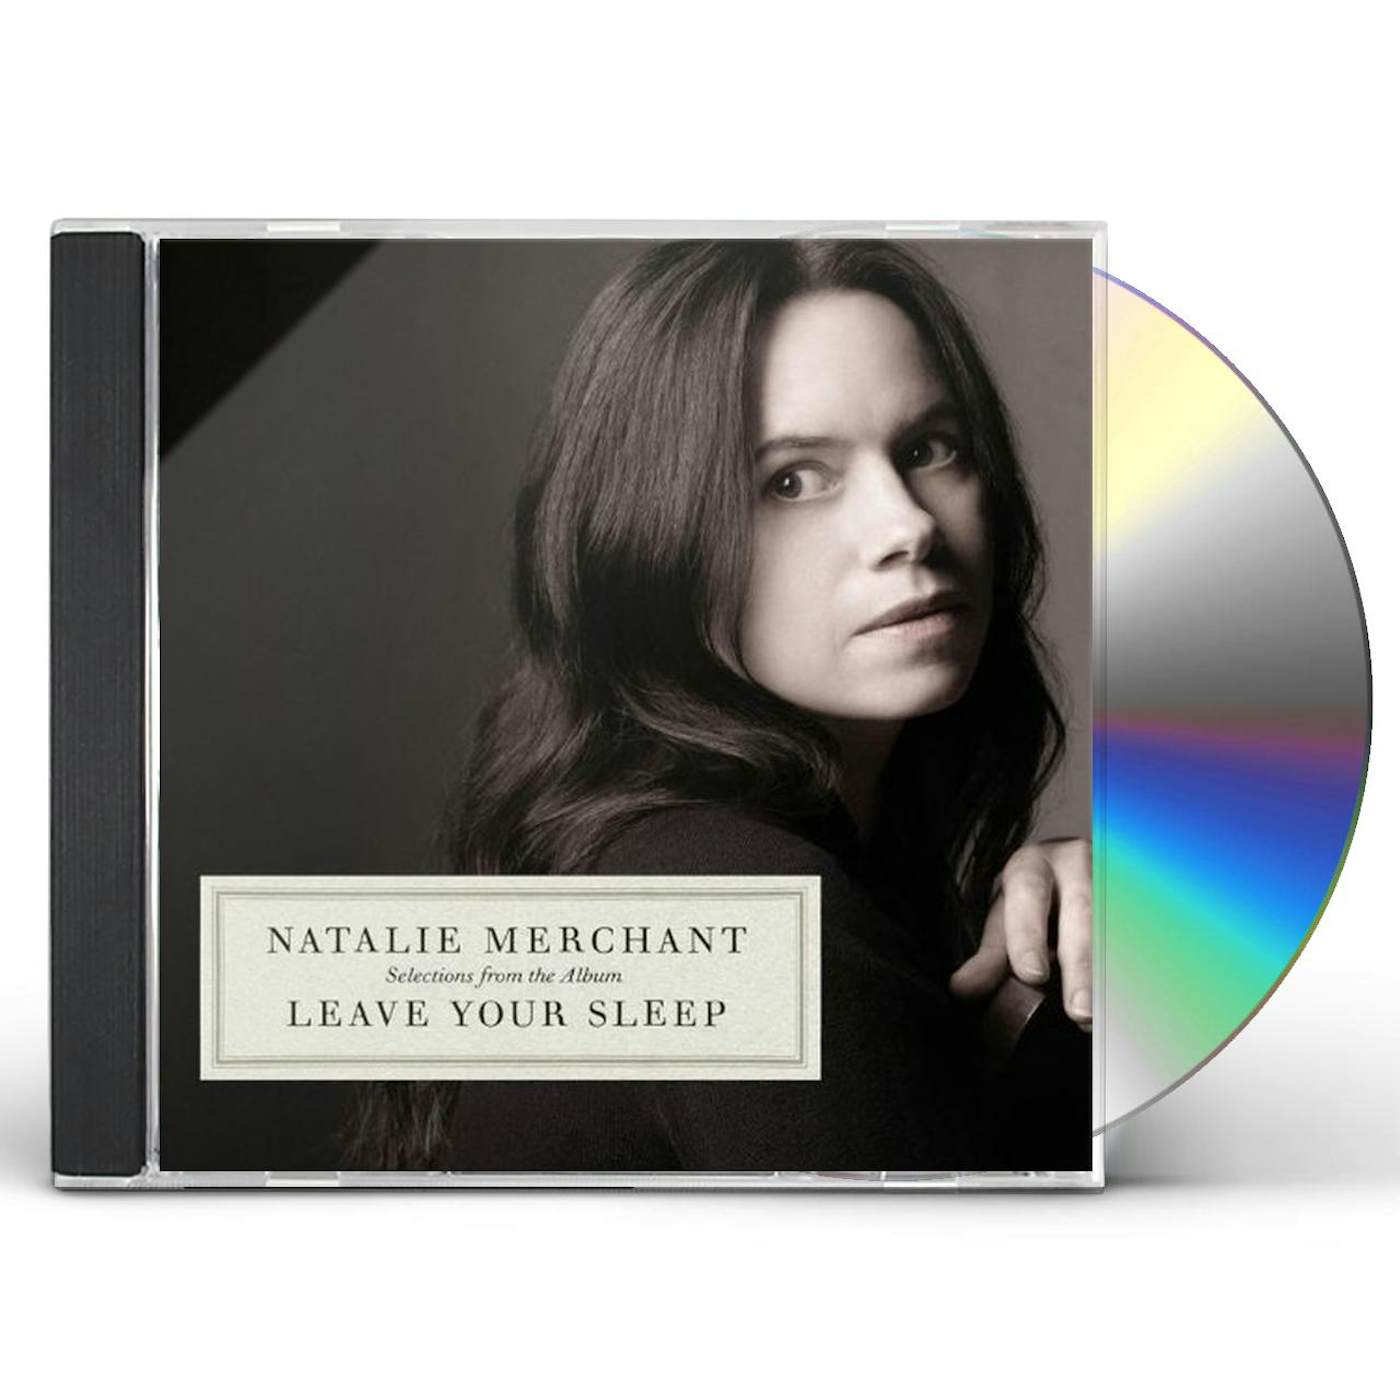 Natalie Merchant SELECTIONS FROM THE ALBUM LEAVE YOUR SLEEP CD